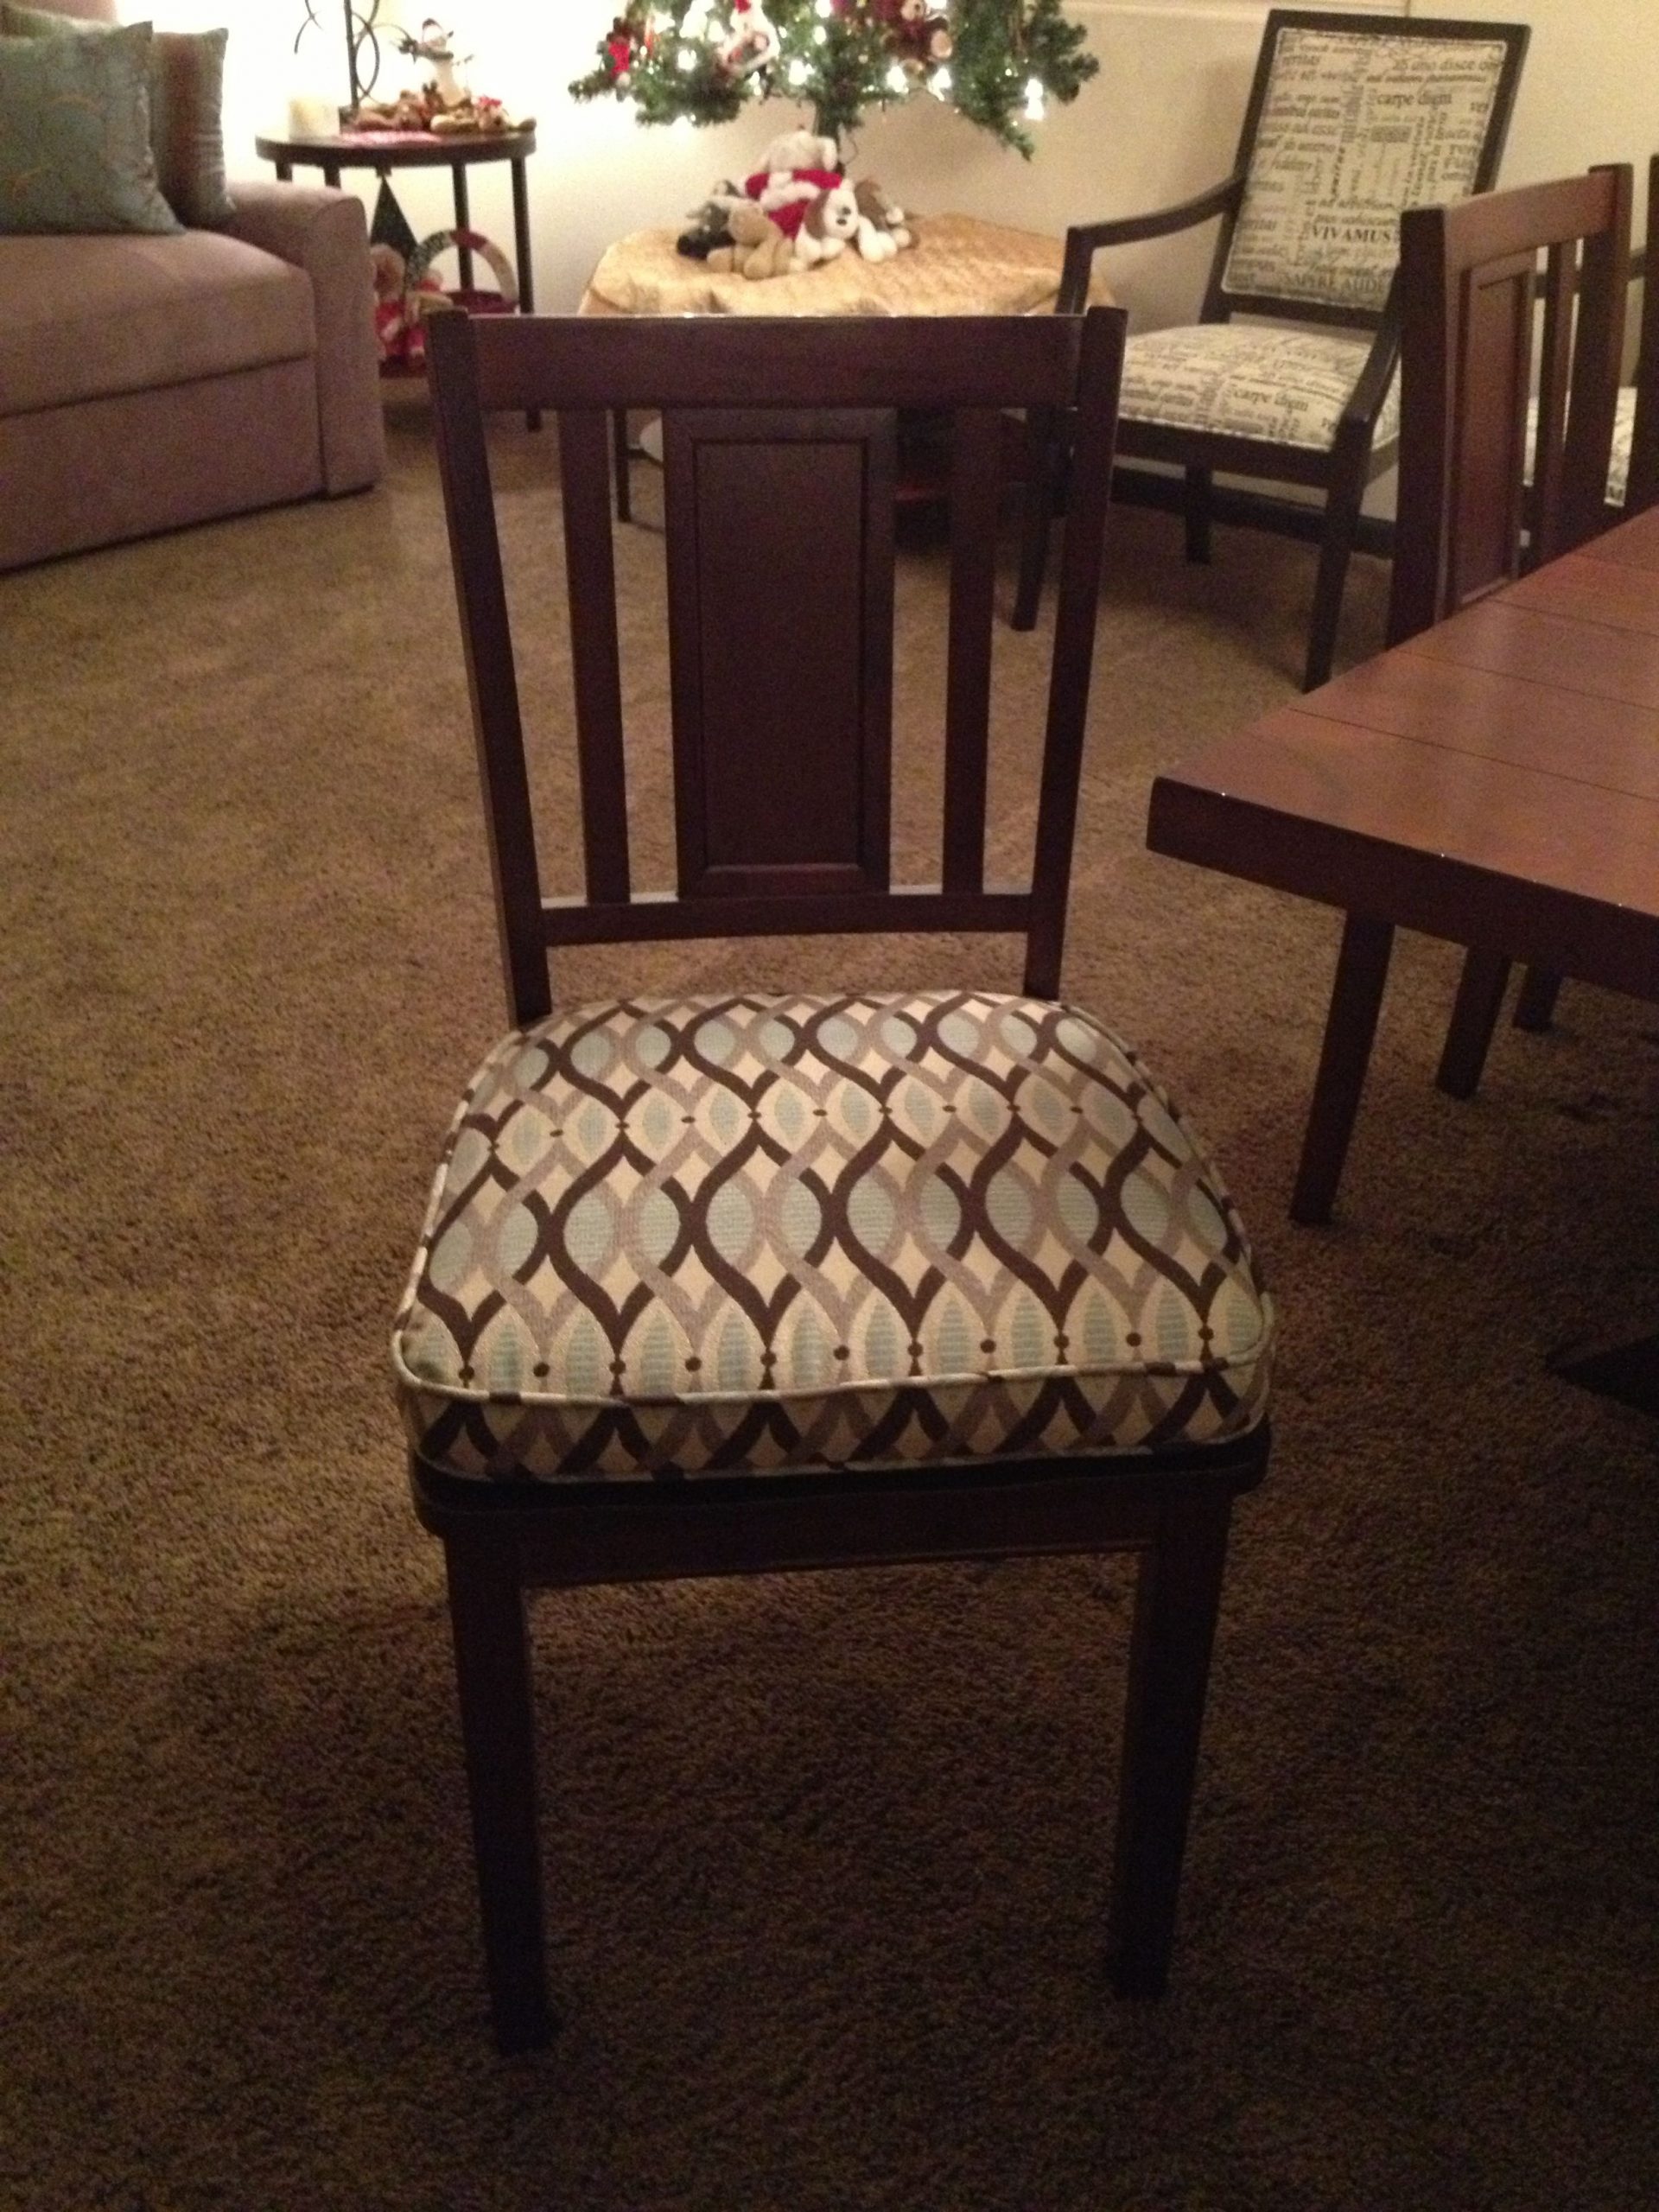 Reupholstered Dining Chairs With A Repeat Pattern Fabric And intended for sizing 2448 X 3264